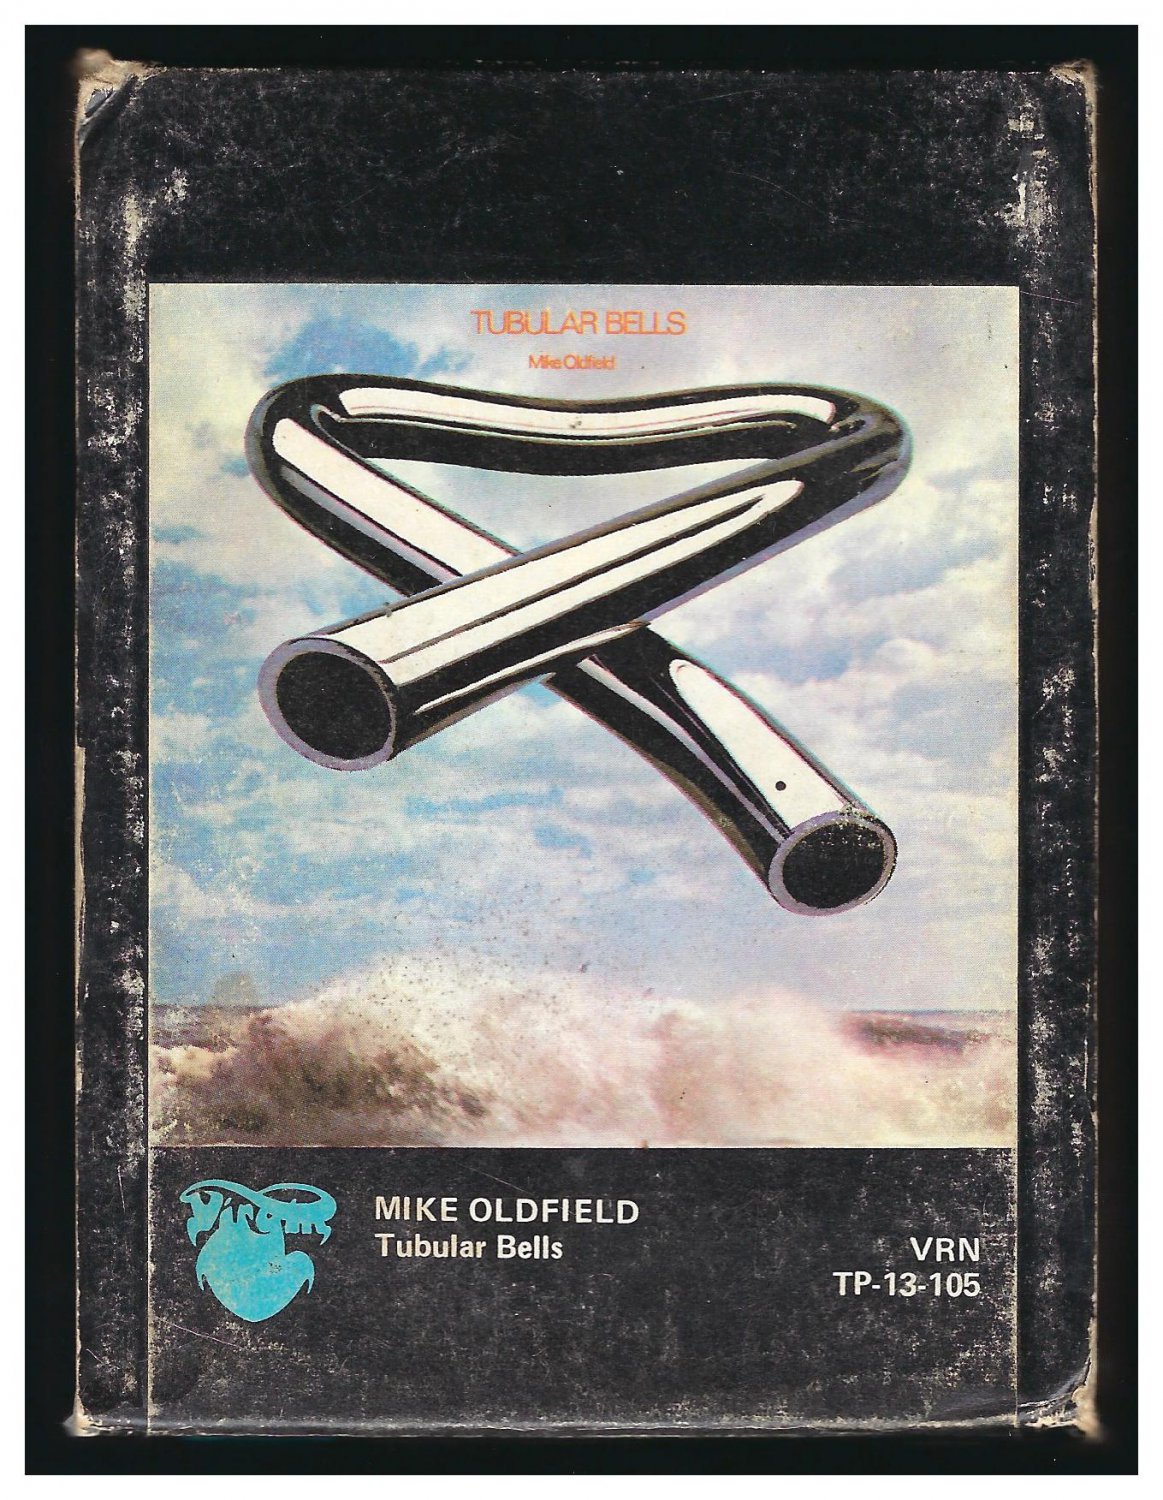 Tubular Bells is the first album by English musician Mike Oldfield